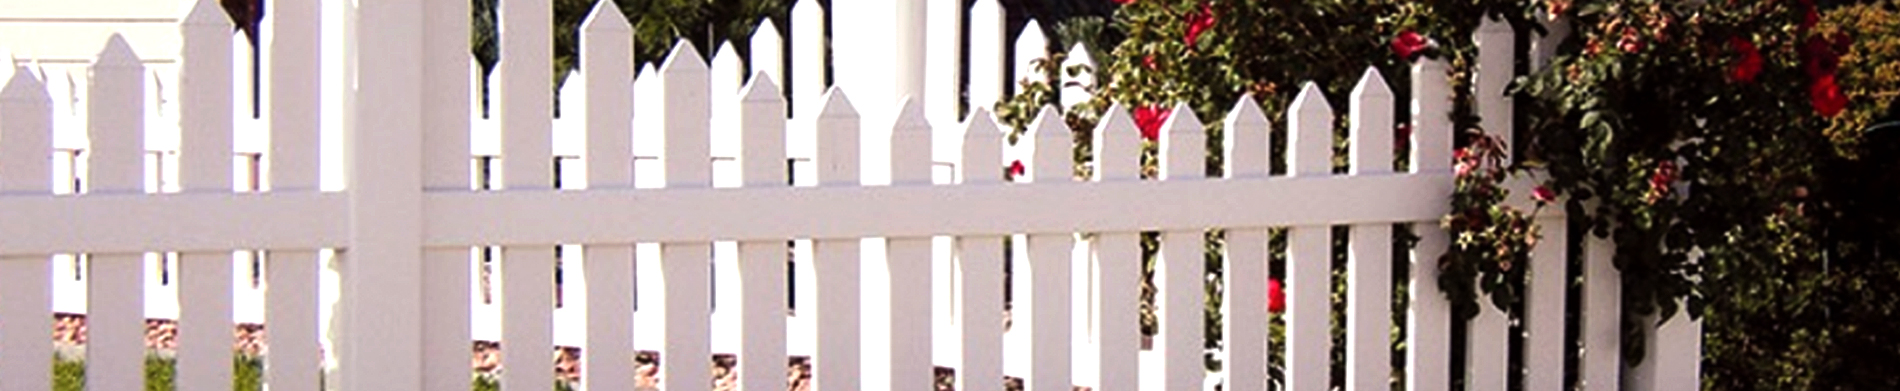 Pros Of Installing Vinyl Fencing For Your Property In Utah